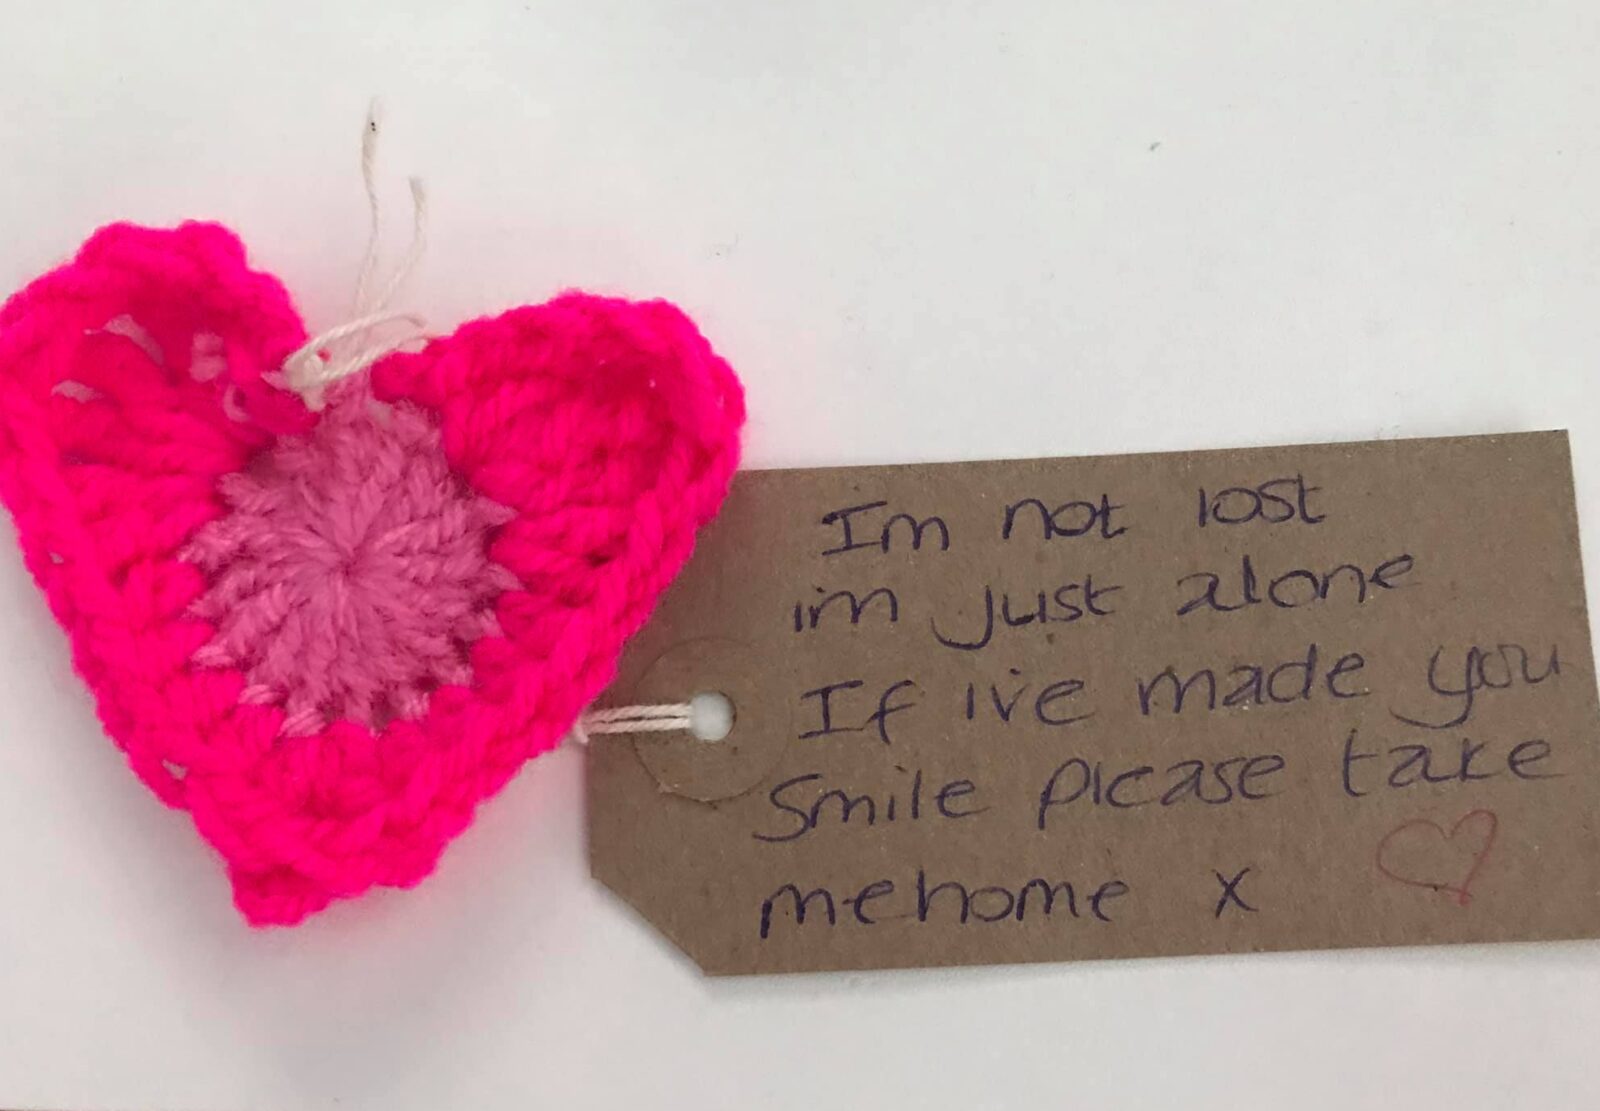 The woman who leaves &#8216;random acts of crochet kindness&#8217; to make the people of Salford smile, The Manc